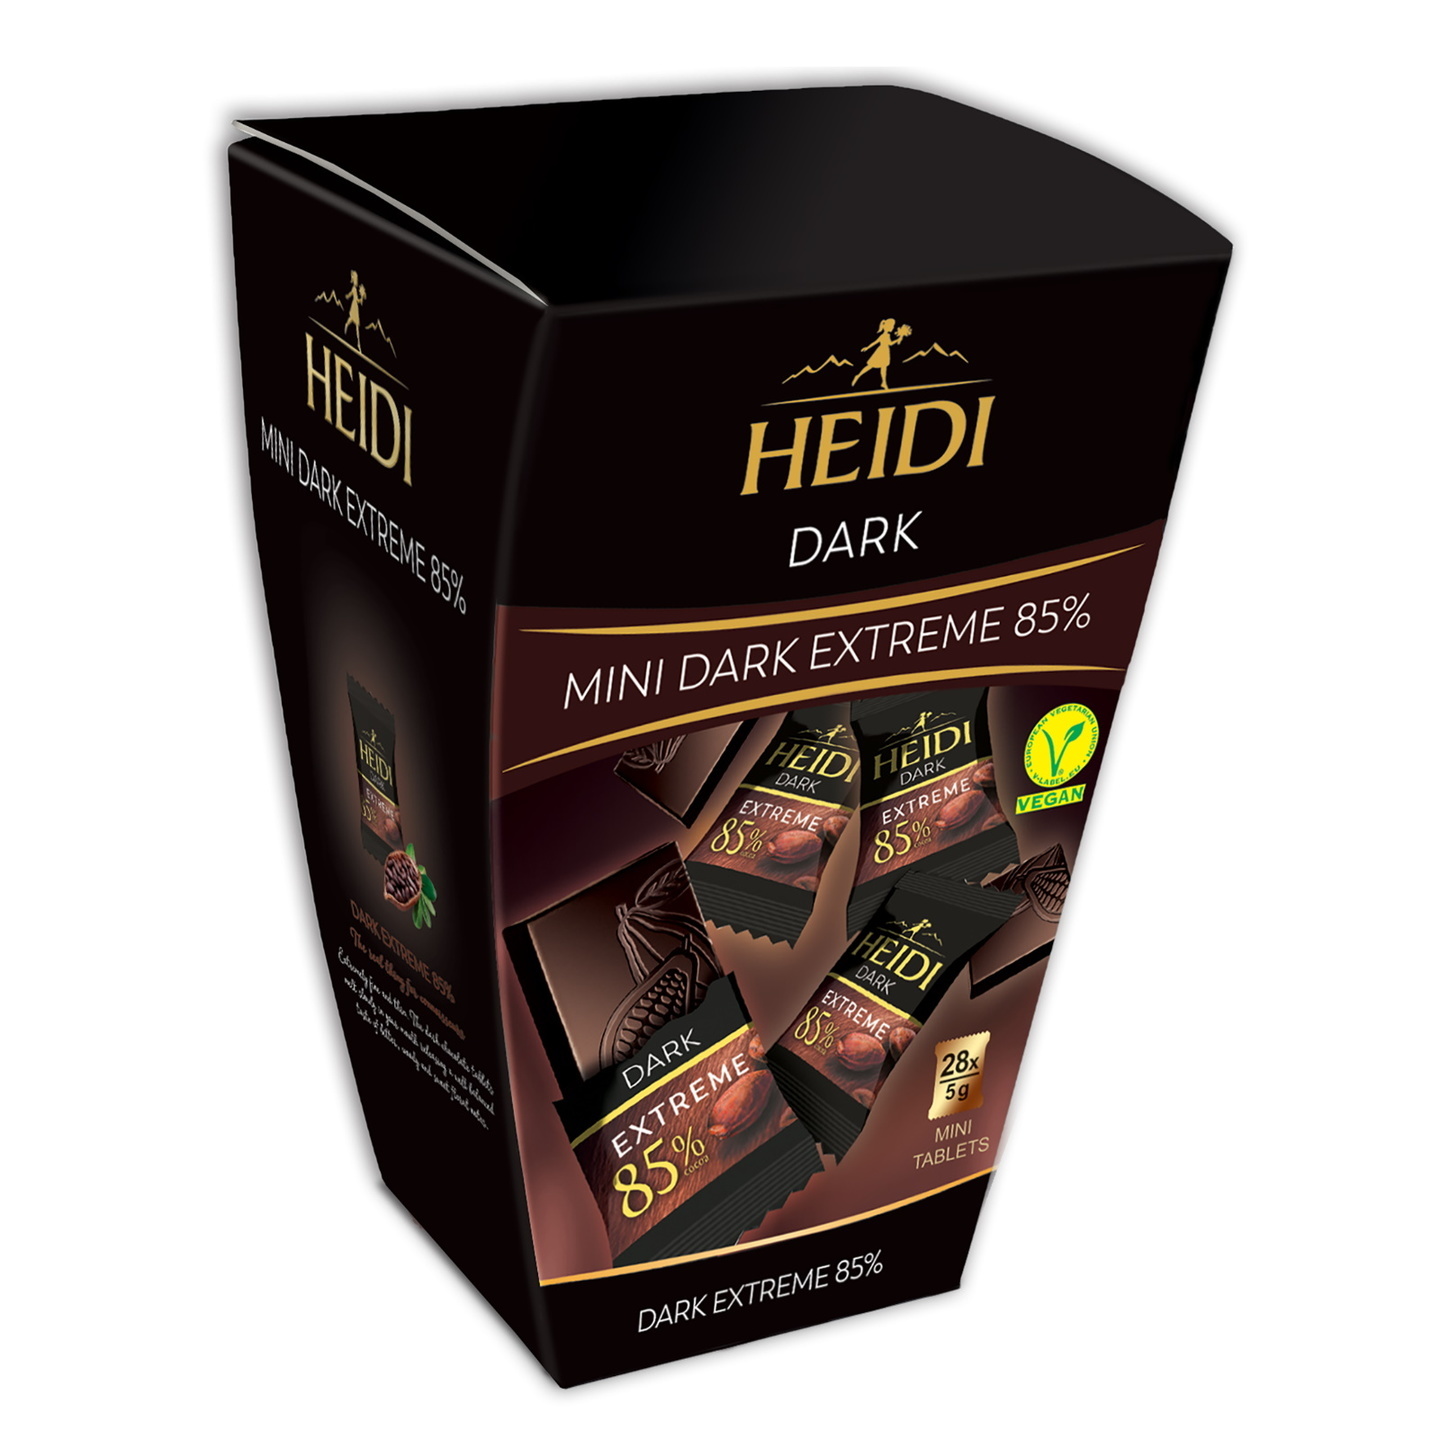 Heidi Dark Extreme 85% Chocolate Mini Bites - Individually Wrapped 28 x 5gm Tablets in an attractive Gift Box 1 x 140gm